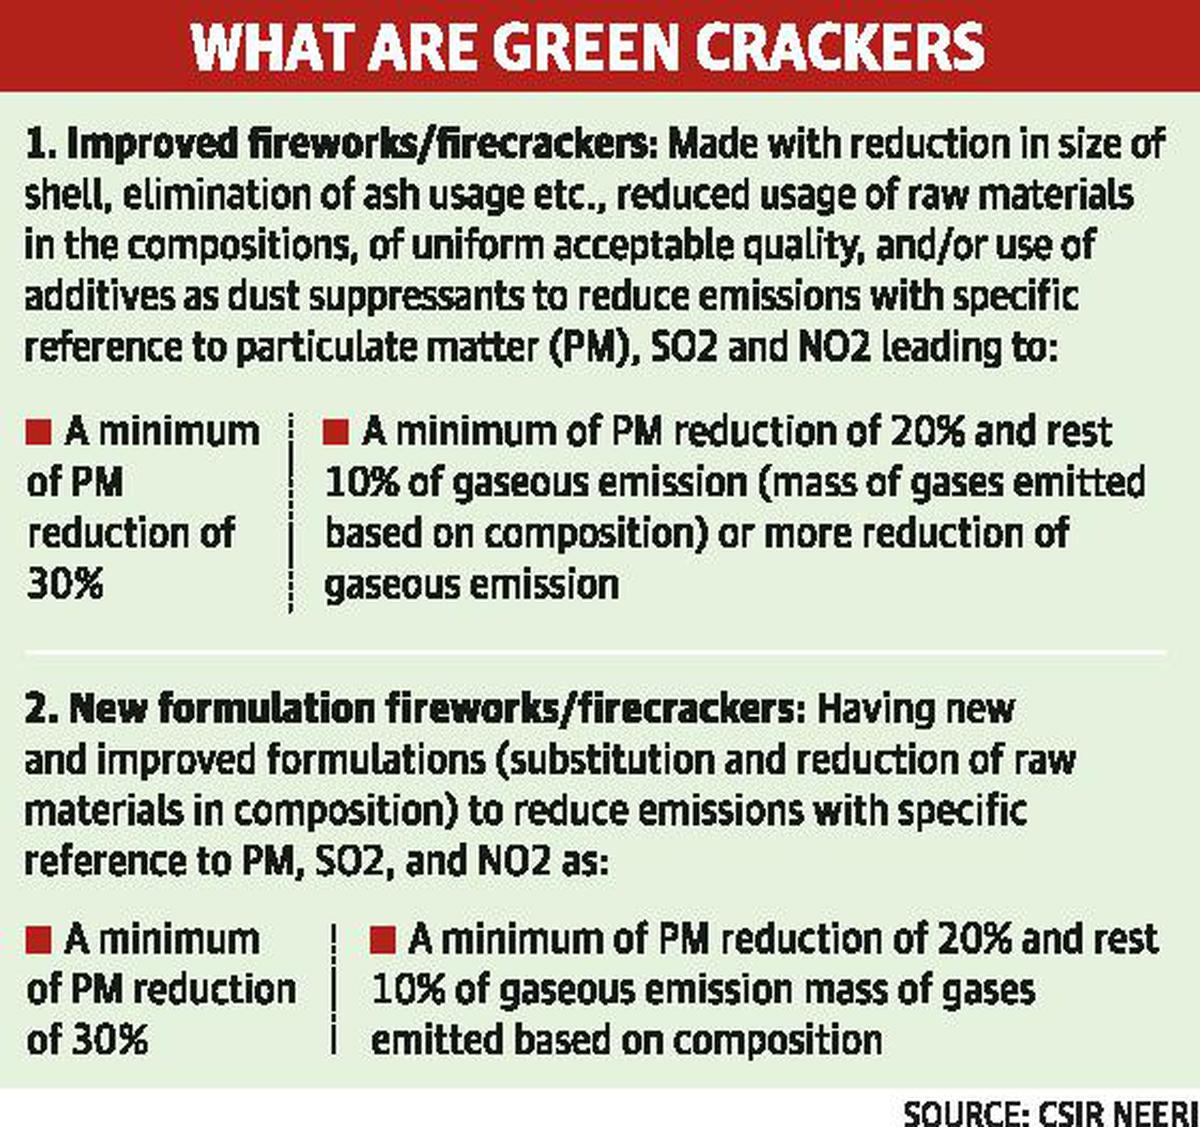 Are green crackers really green?